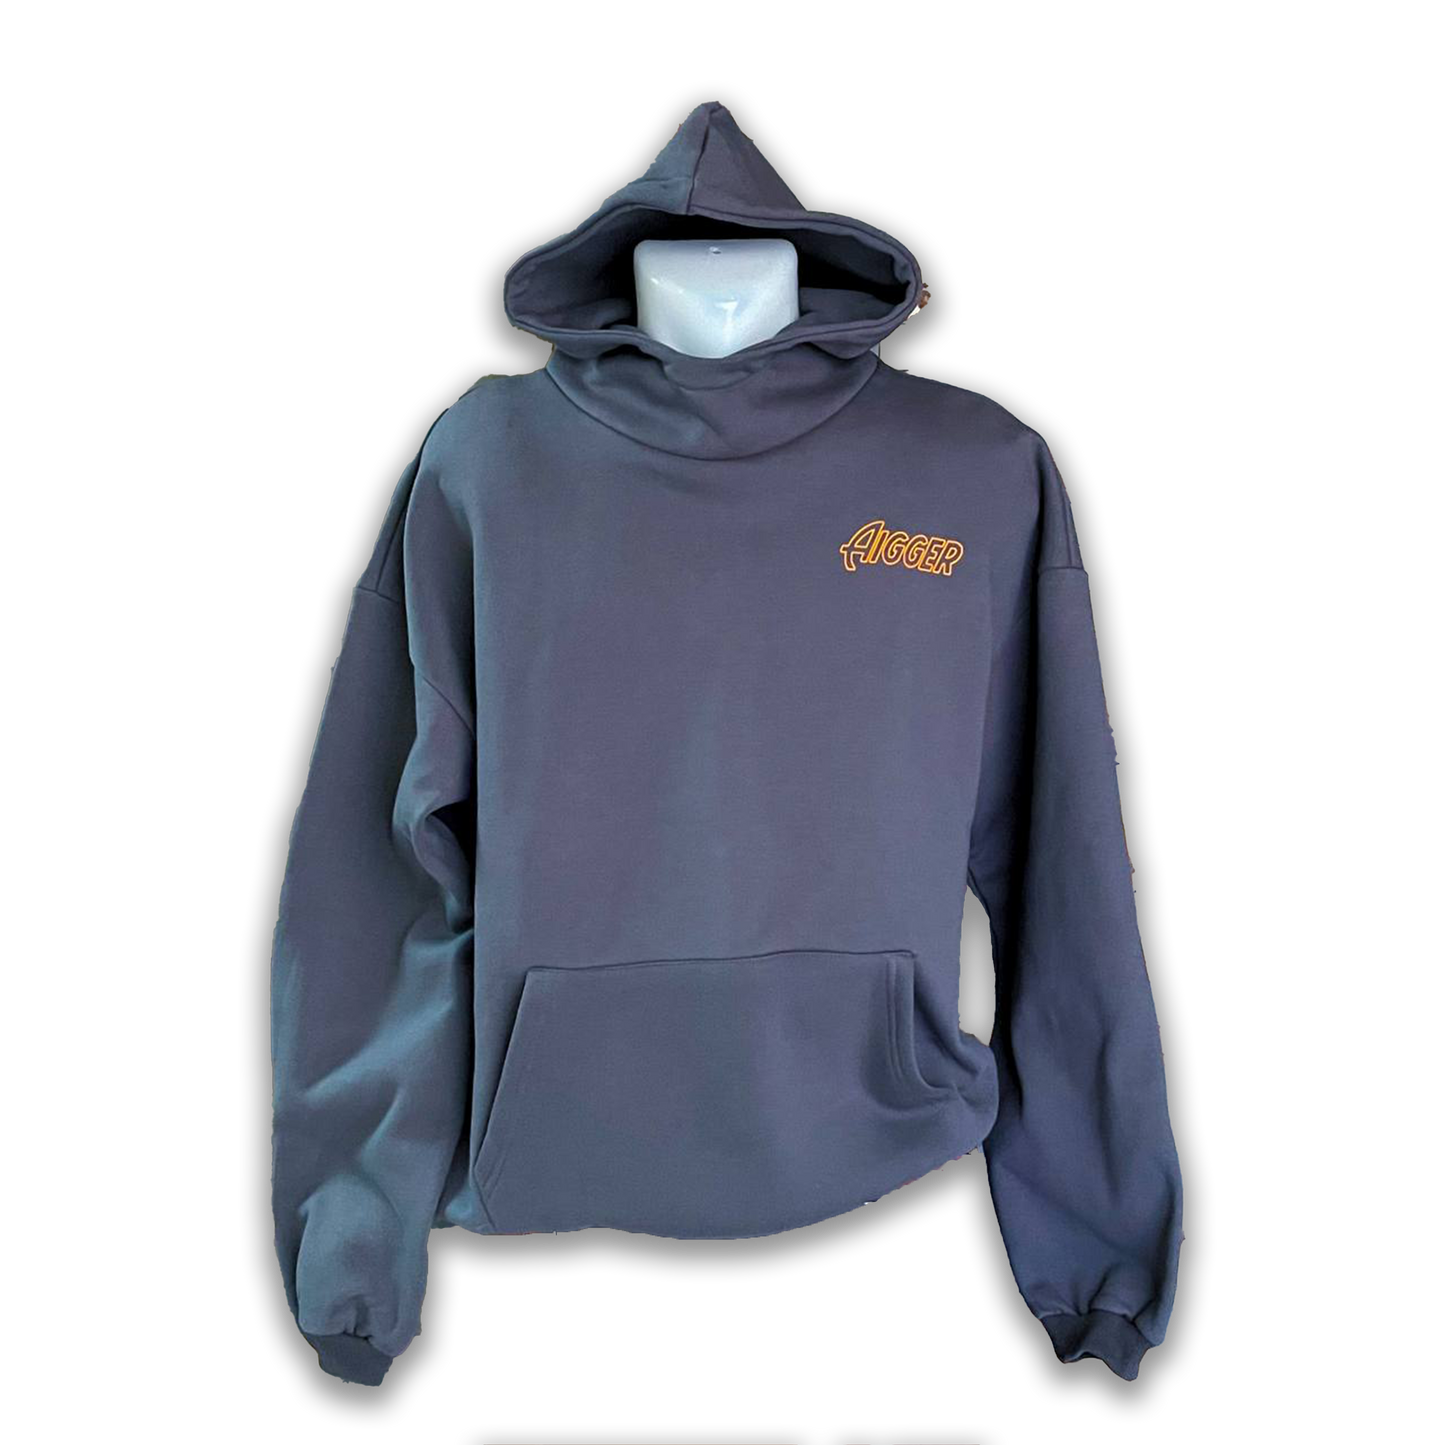 Be Aigger Gray Hoodie